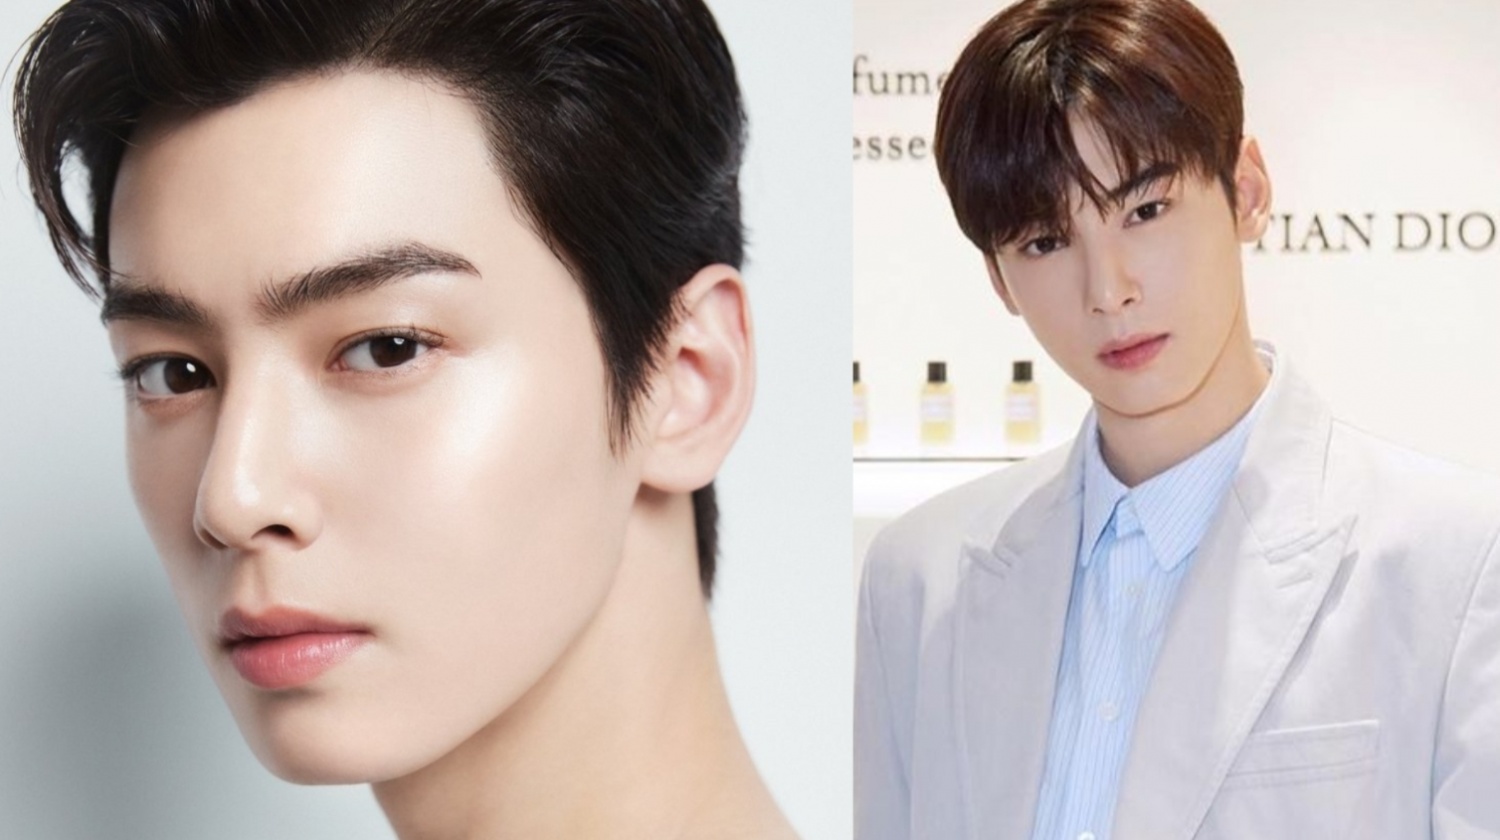 ASTRO Cha Eunwoo Skincare Routine: Here's How to Get Flawless, Hydrated  Skin Like the 'Face Genius